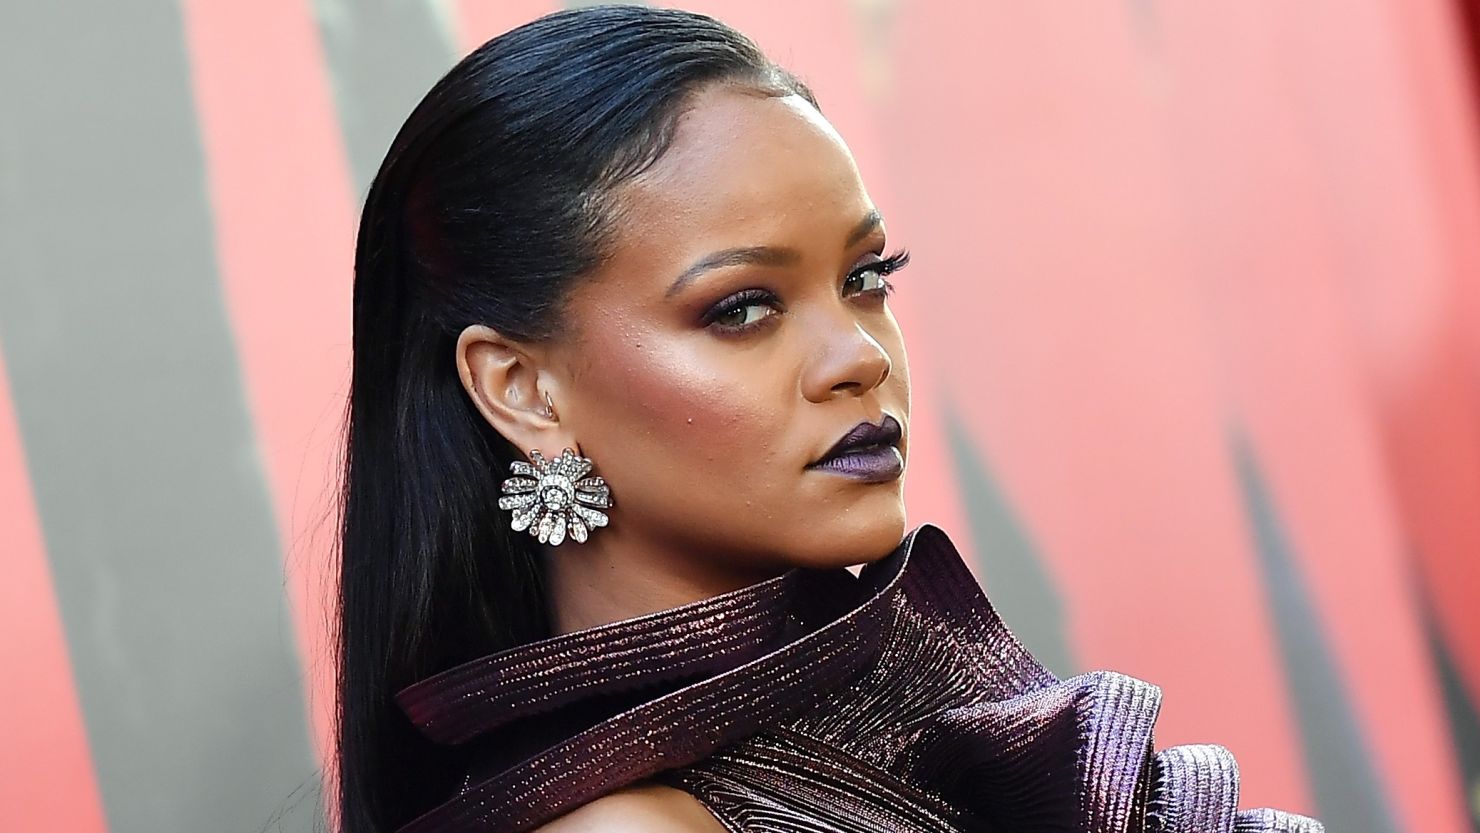 Rihanna attends the world premiere of "Ocean's 8" on June 5, 2018, in New York. (Angela Weiss/AFP/Getty Images)